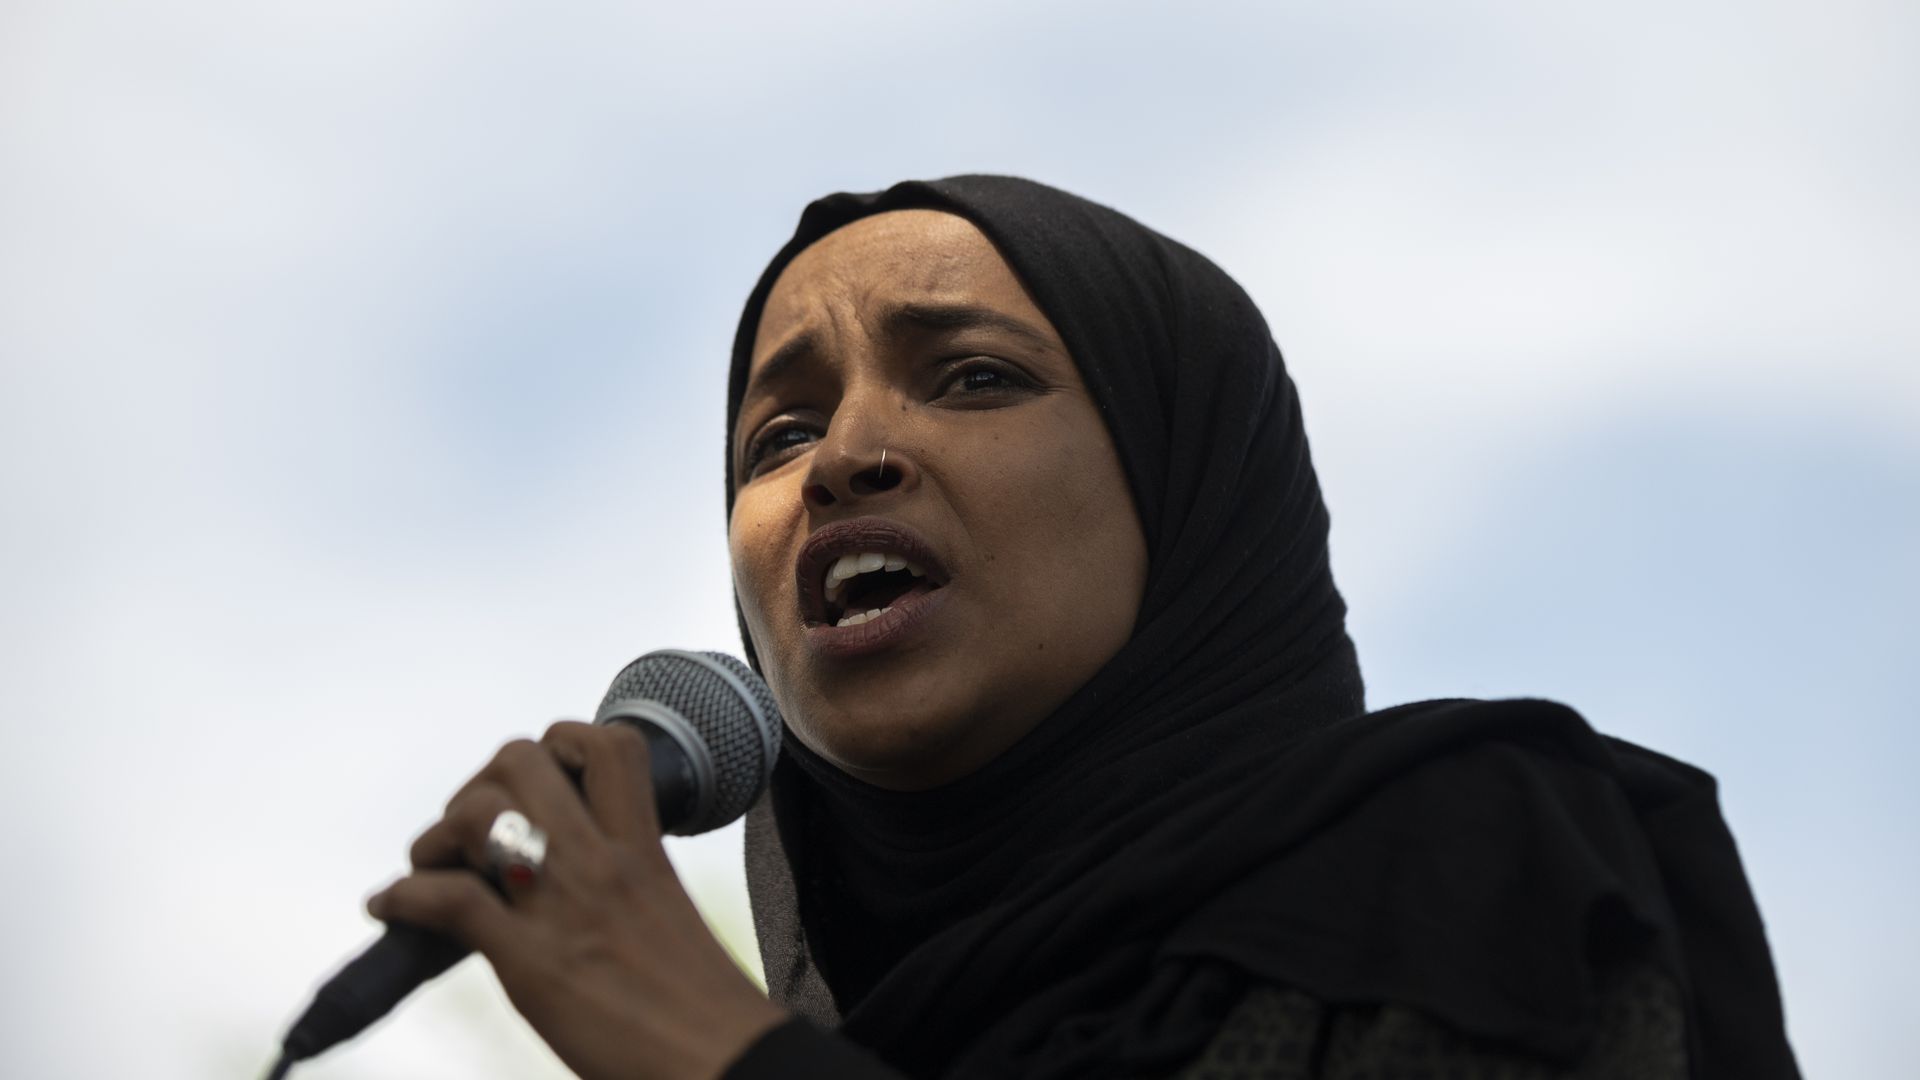  Rep. Ilhan Omar (D-MN) speaks to a crowd gathered for a march to defund the Minneapolis Police Department on June 6, 2020 in Minneapolis, Minnesota. 